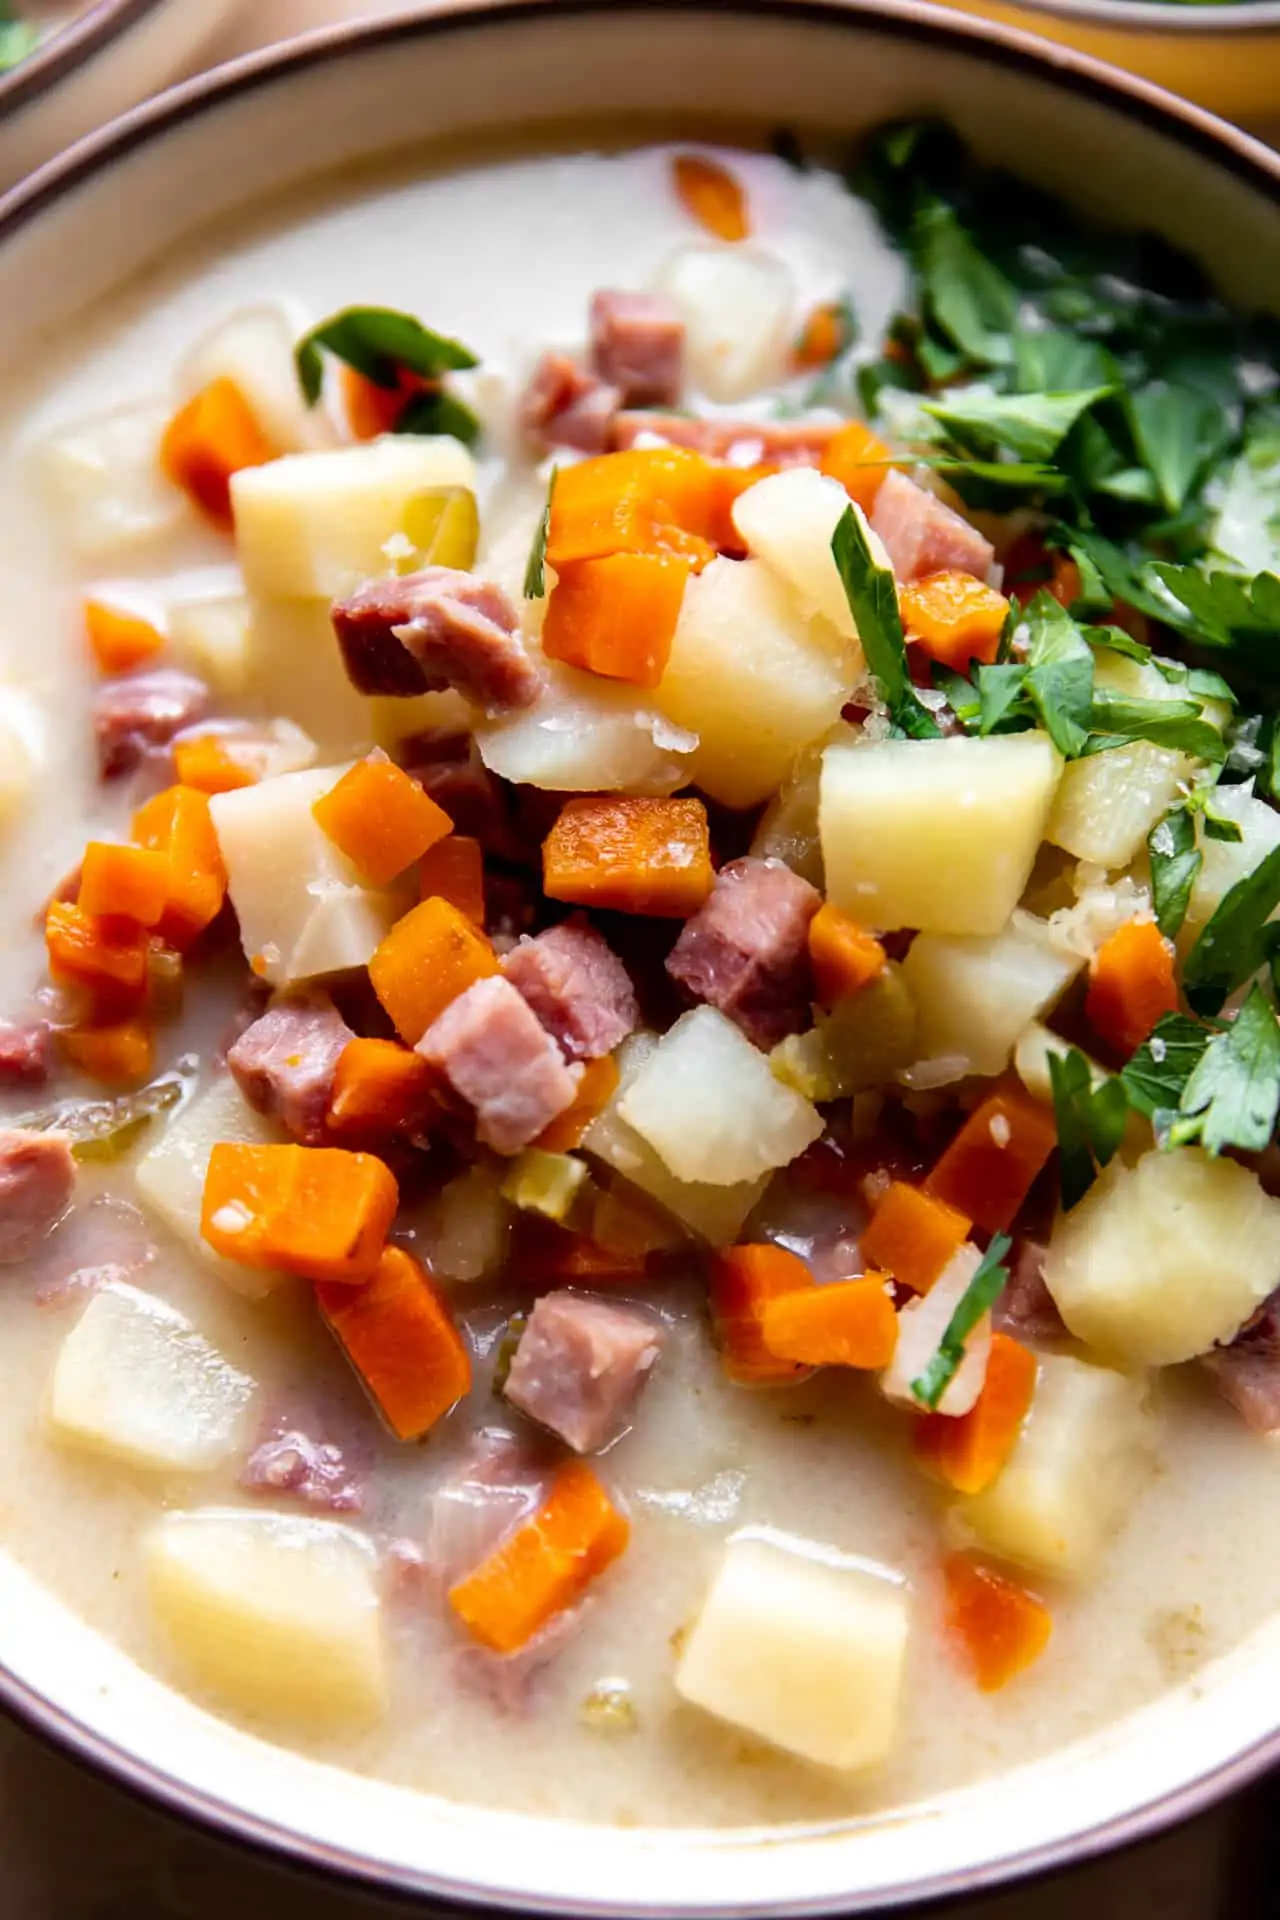 Up close view of ham bone soup with chunks of ham, potato, veggies in a creamy broth topped with diced parsley.